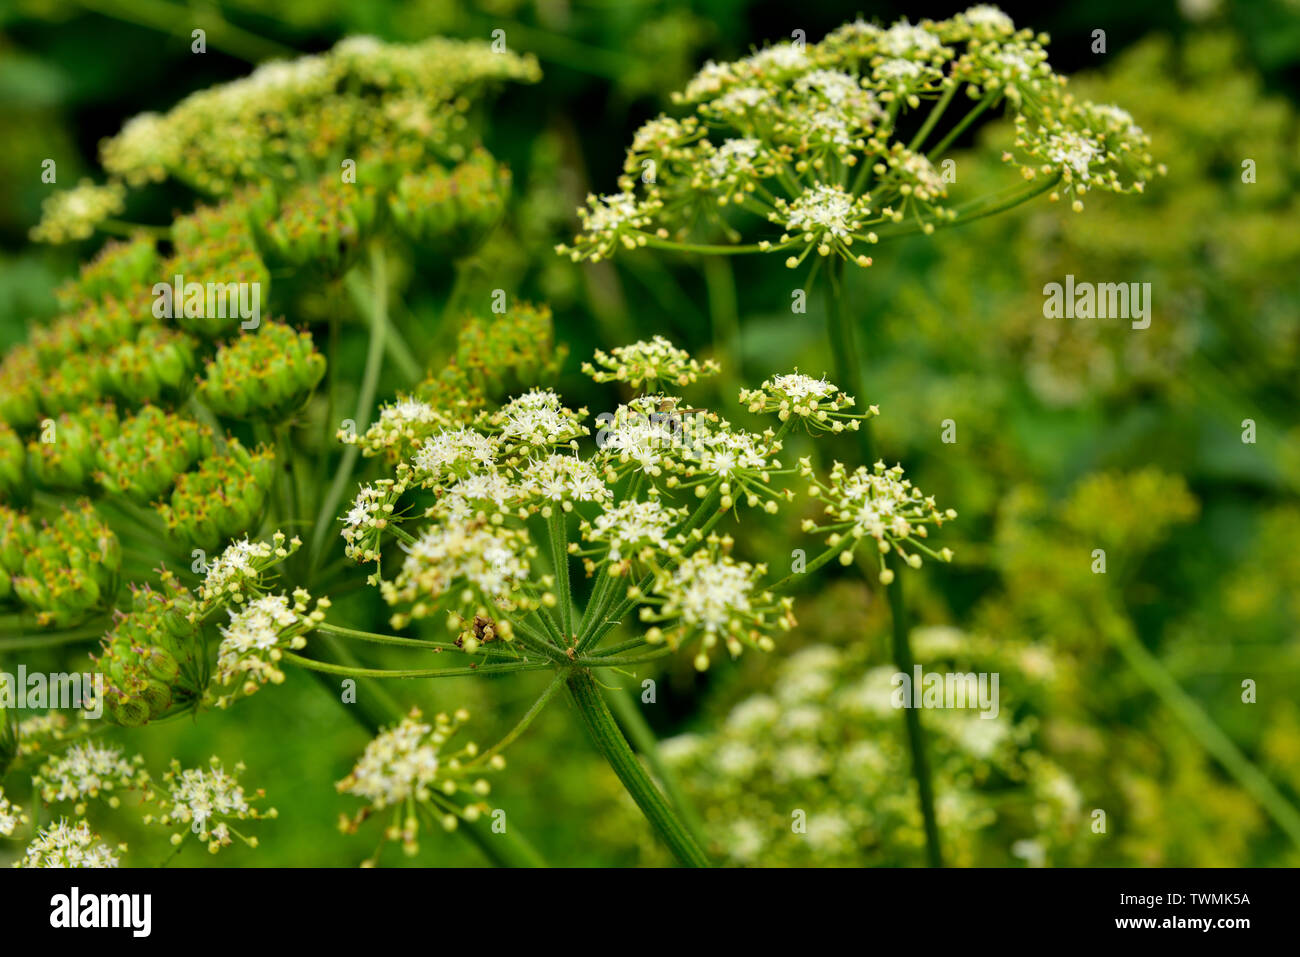 White 'Queen Anne's Lace' or Cow Parsley (Anthriscus sylvestris) wildflowers growing in hedgerow Stock Photo